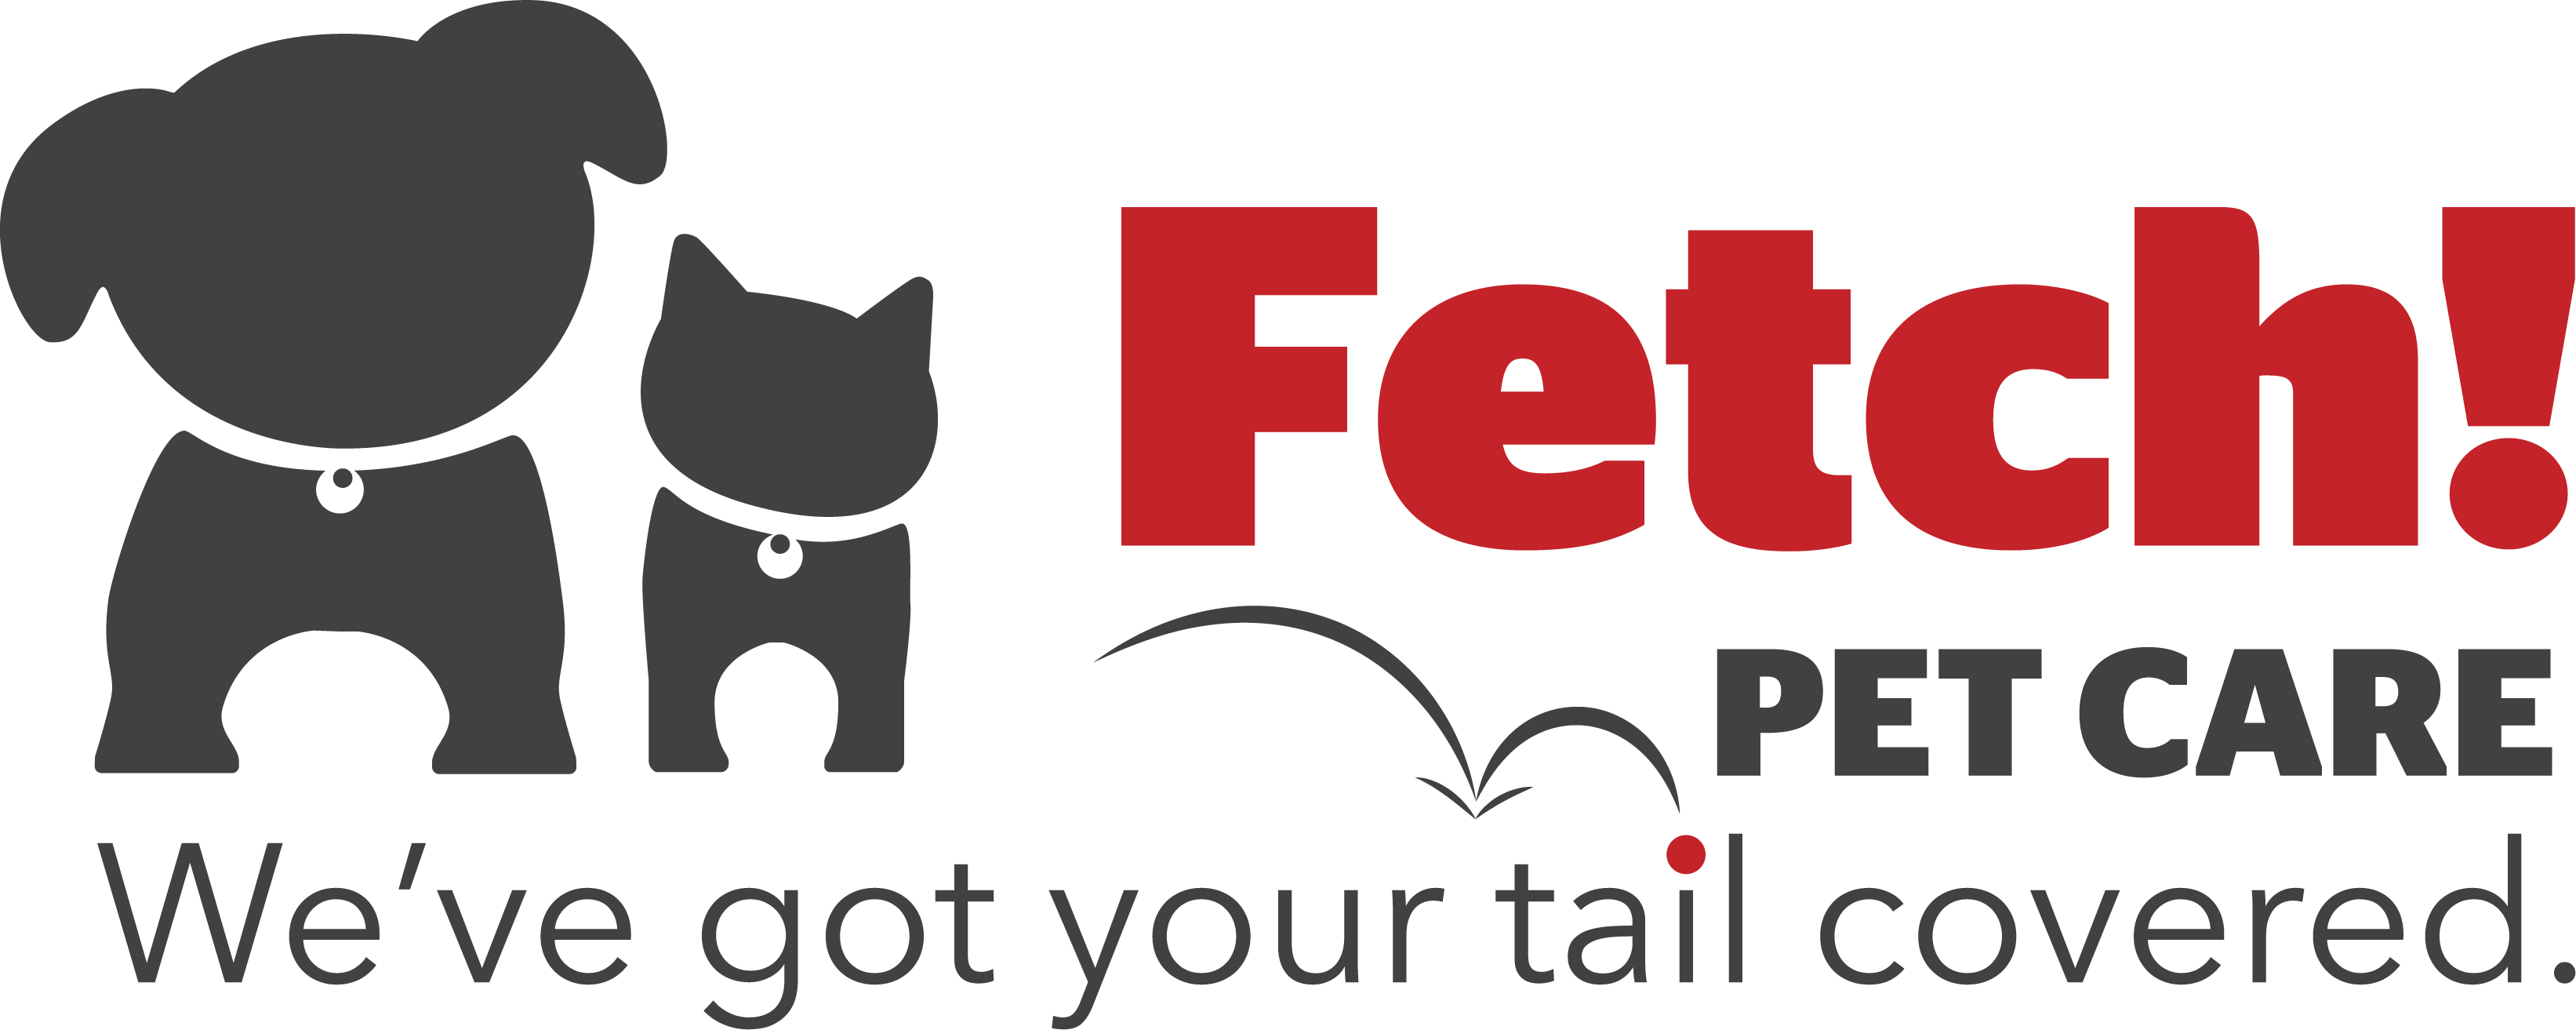 Fetch! Pet Care Franchises Collaborate with The Washington Nationals,  Budweiser, & Humane Rescue Alliance for a Successful 2017 'Pups in the Park'  Fundraising Event - Fetch! Pet Care